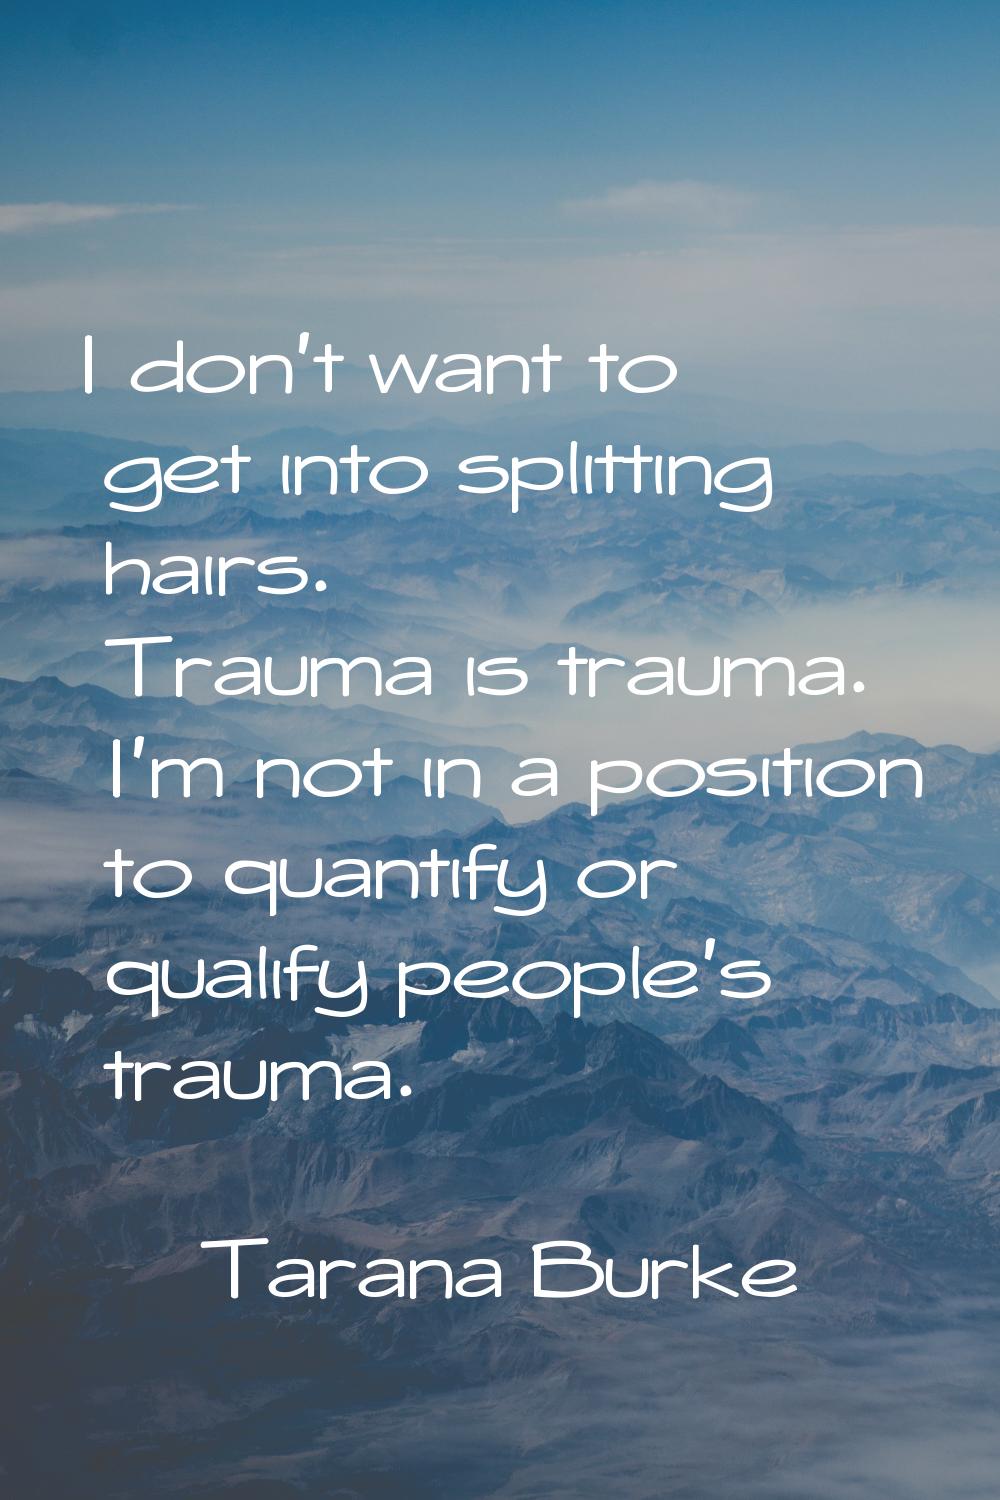 I don't want to get into splitting hairs. Trauma is trauma. I'm not in a position to quantify or qu